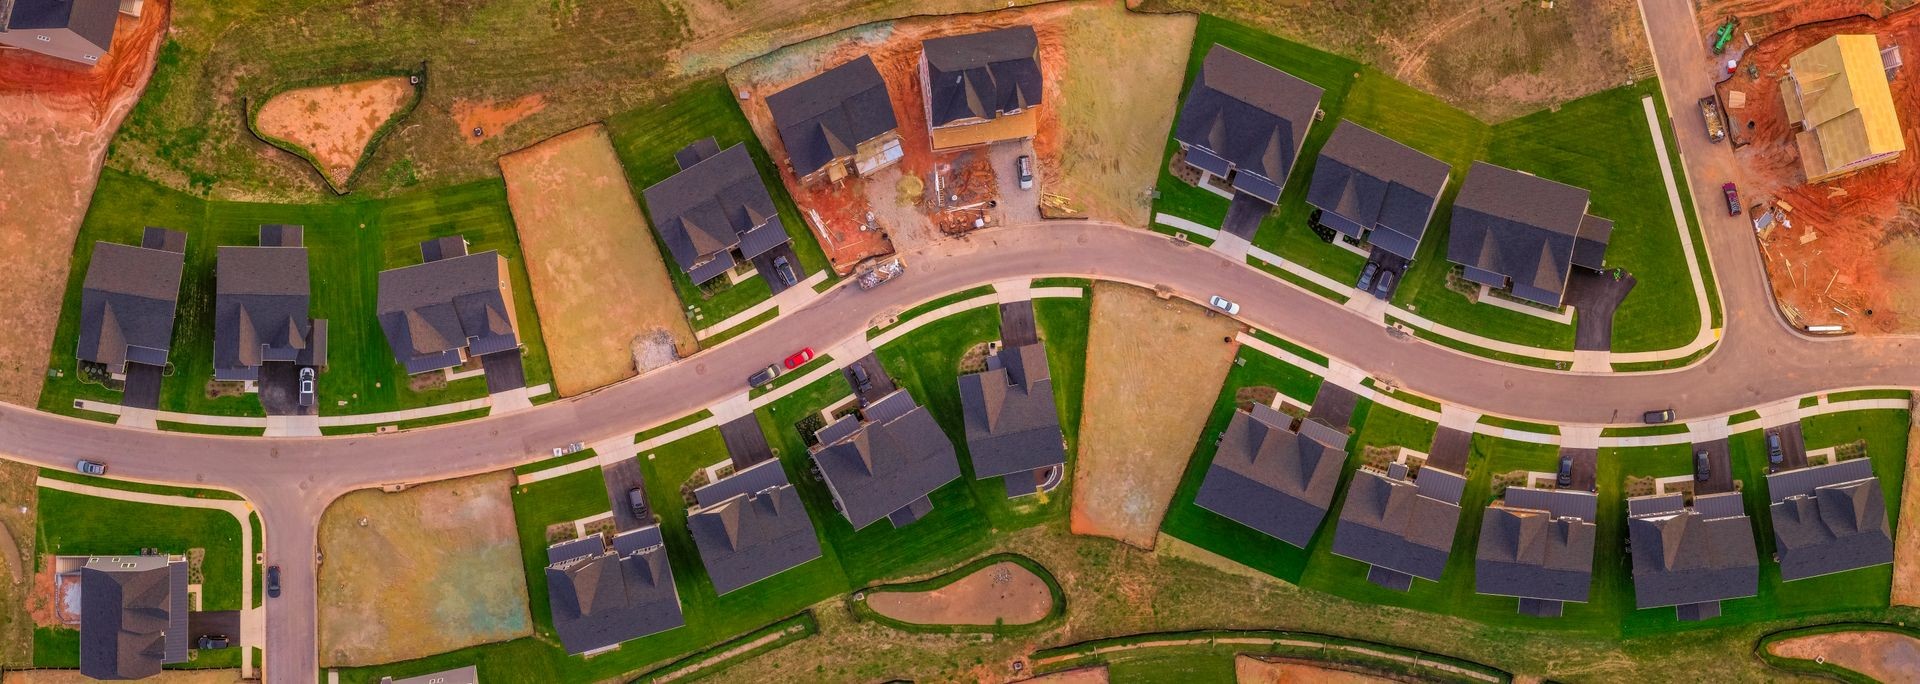 New construction neighborhood aerial panorama of American single family home real estate